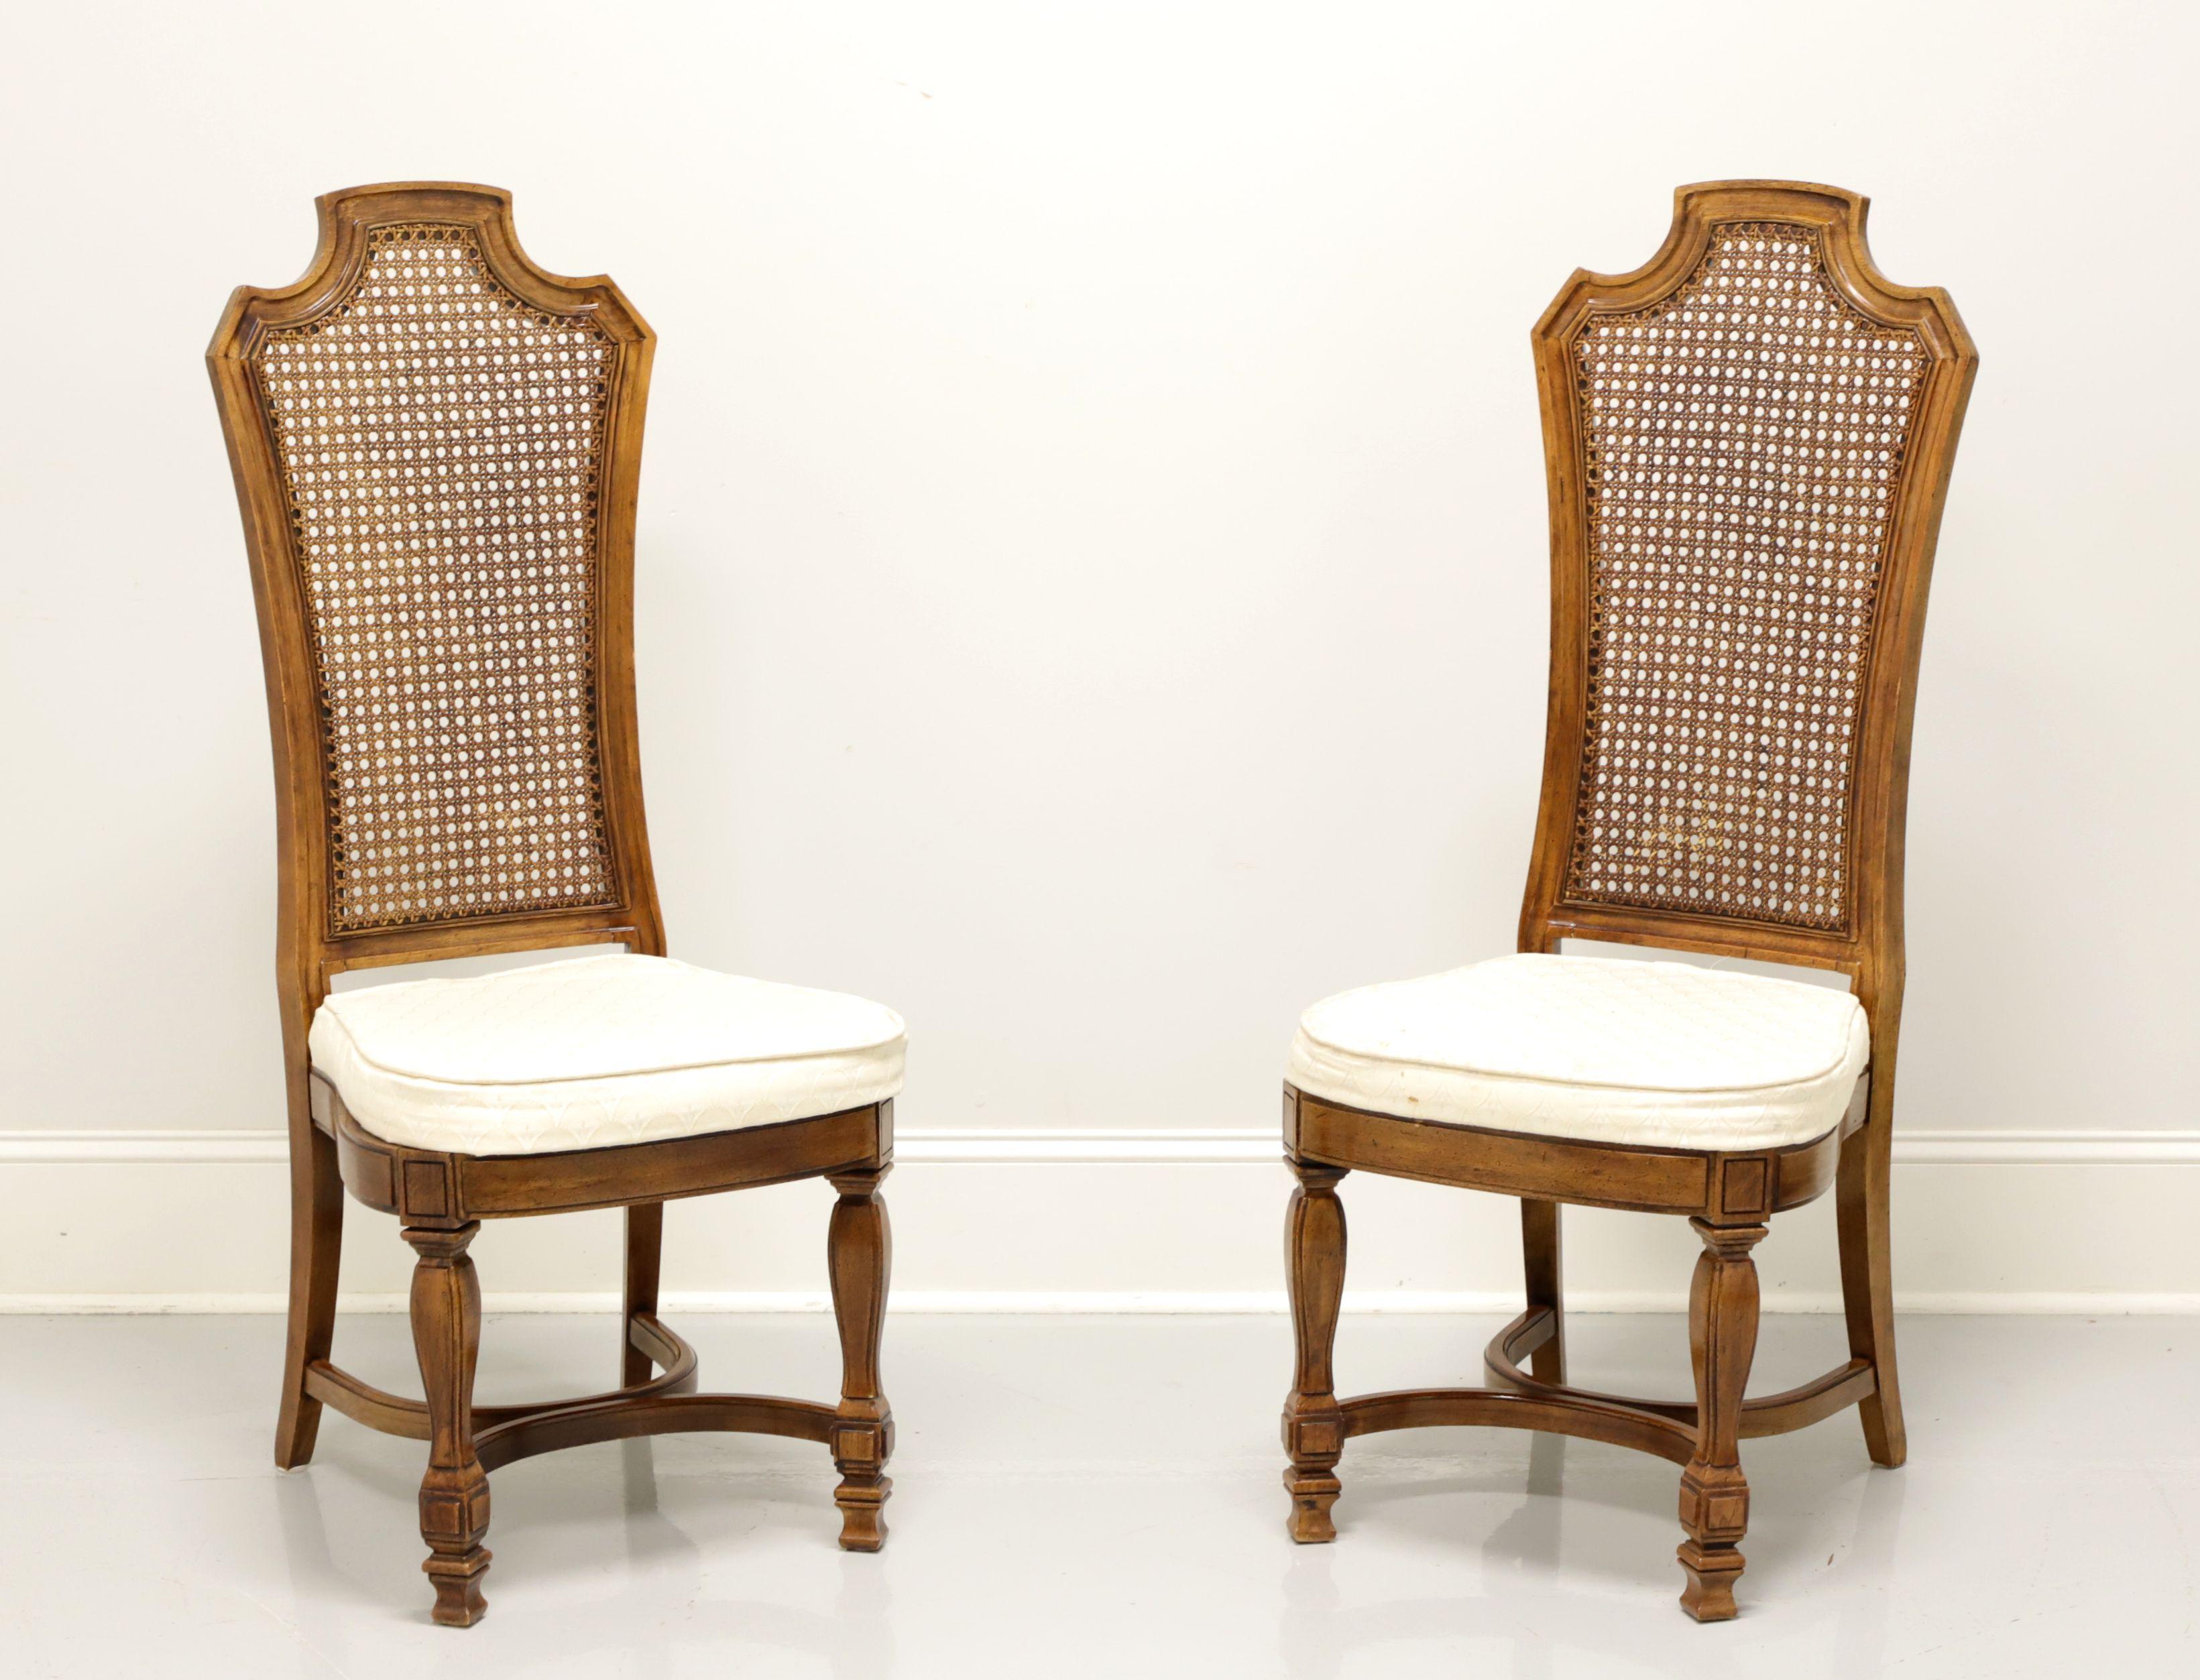 THOMASVILLE Ceremony Collection Mediterranean Walnut Dining Side Chairs - Pair A 3